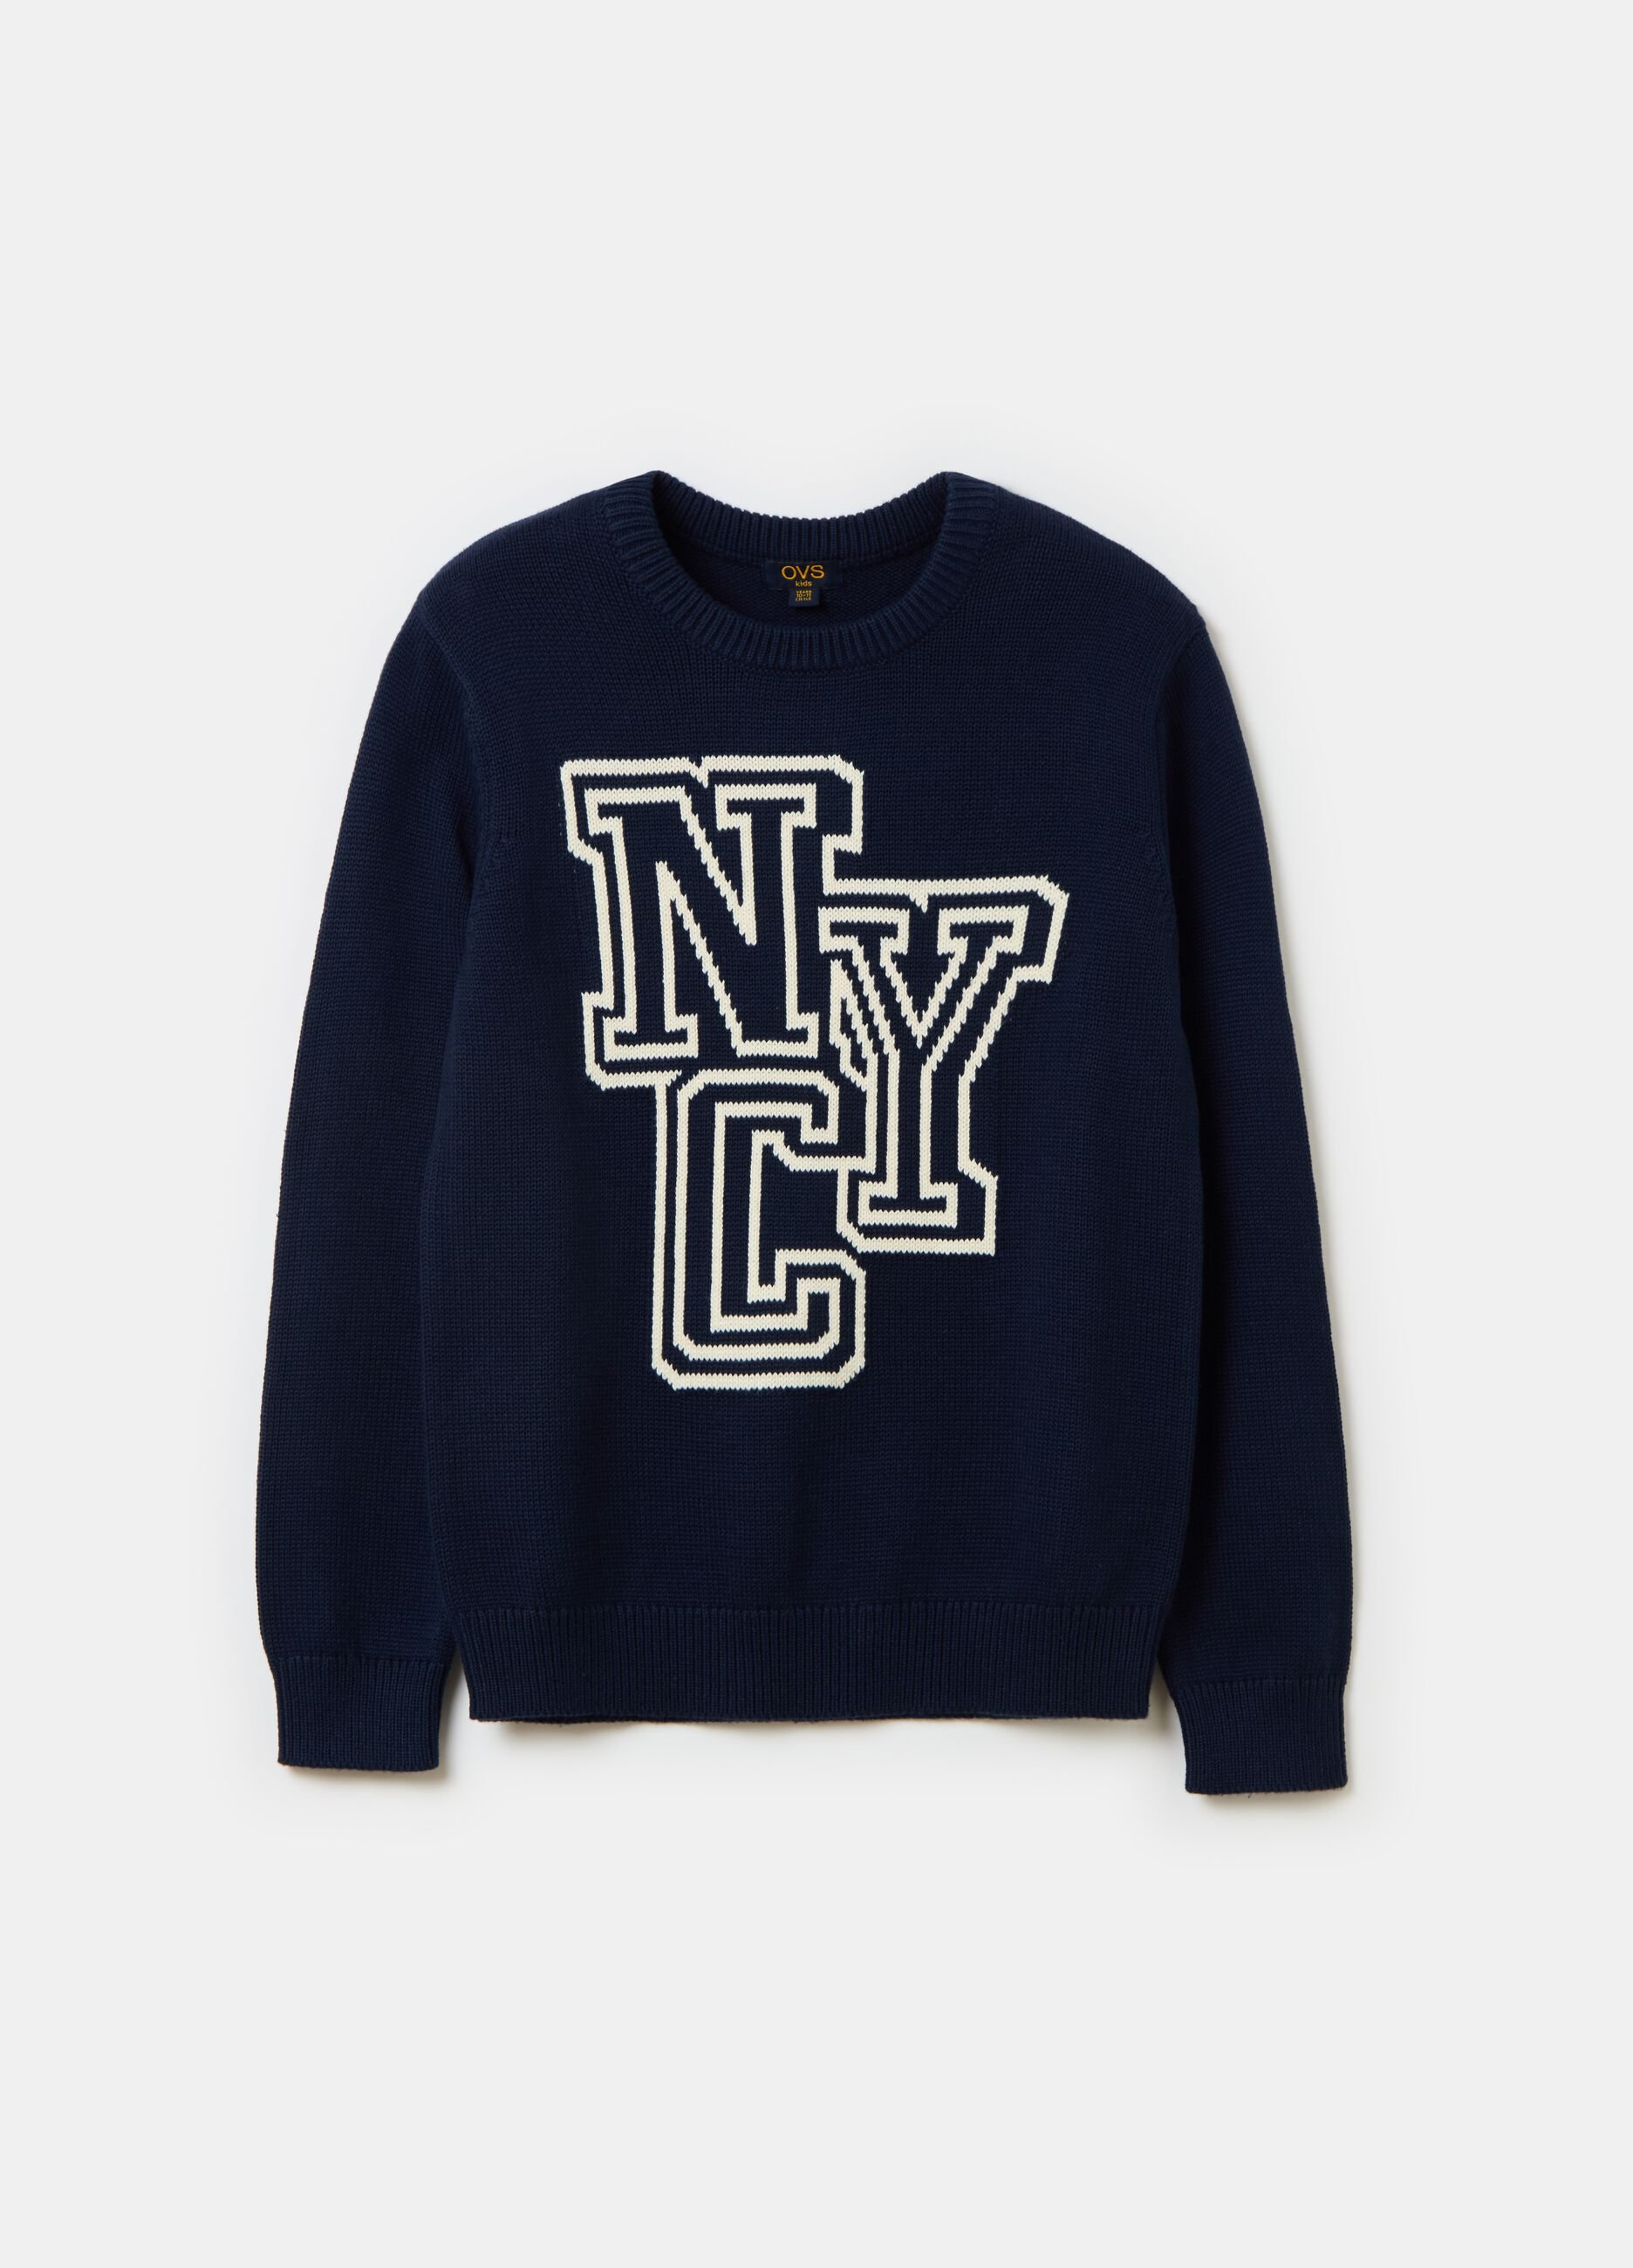 Pullover with jacquard lettering design